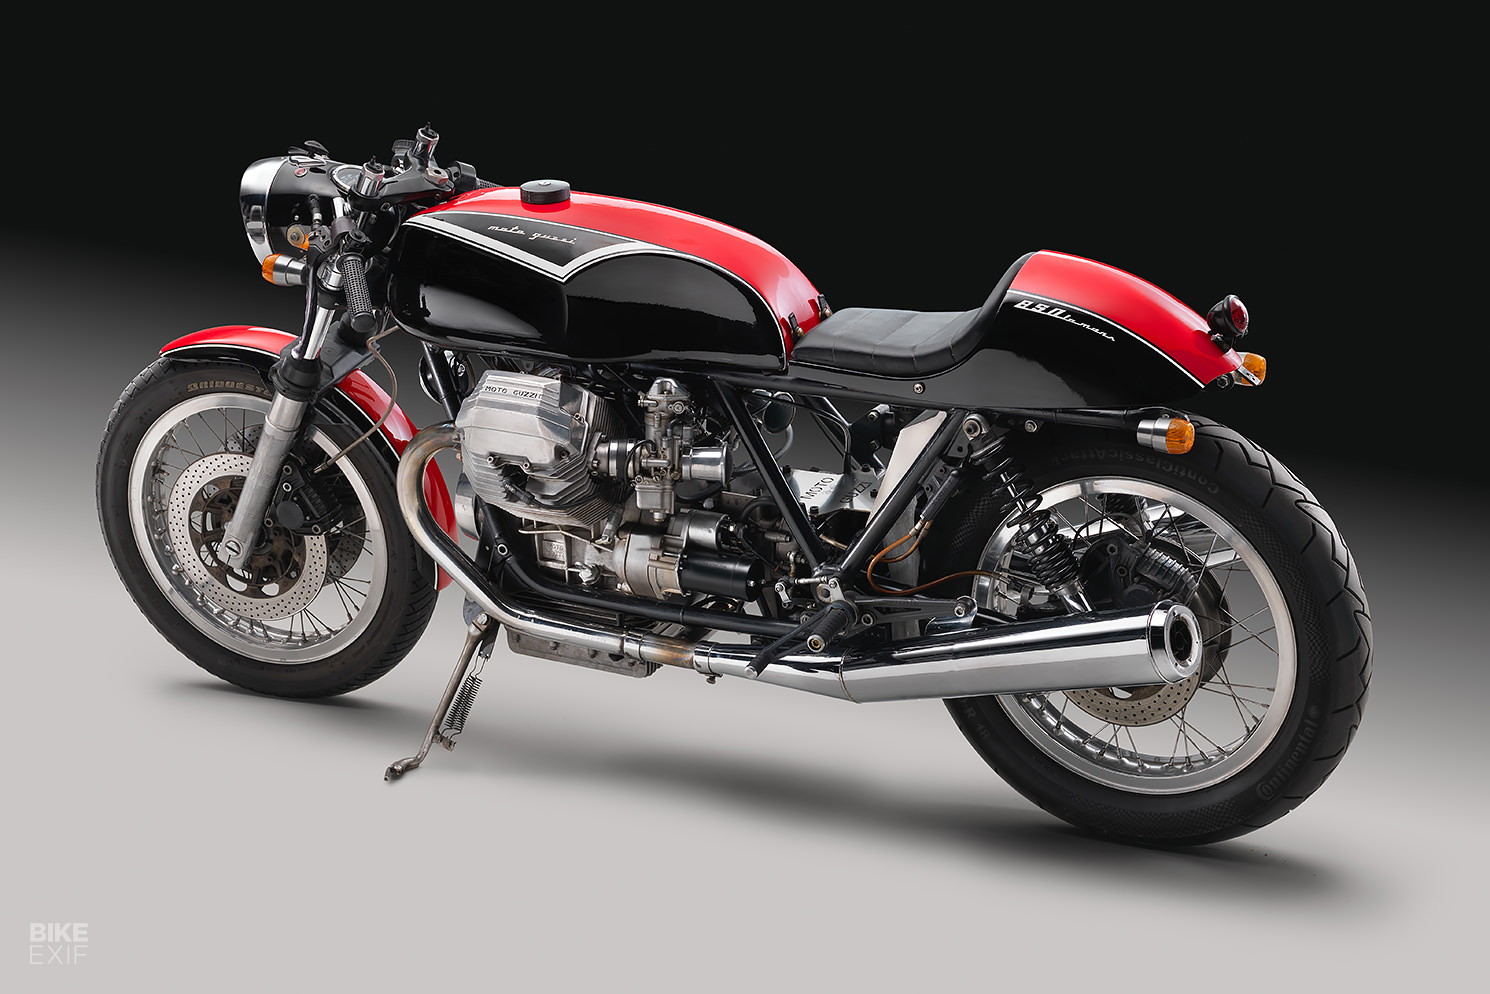 Moto Guzzi Le Mans cafe racer by Sewy Motorcycles